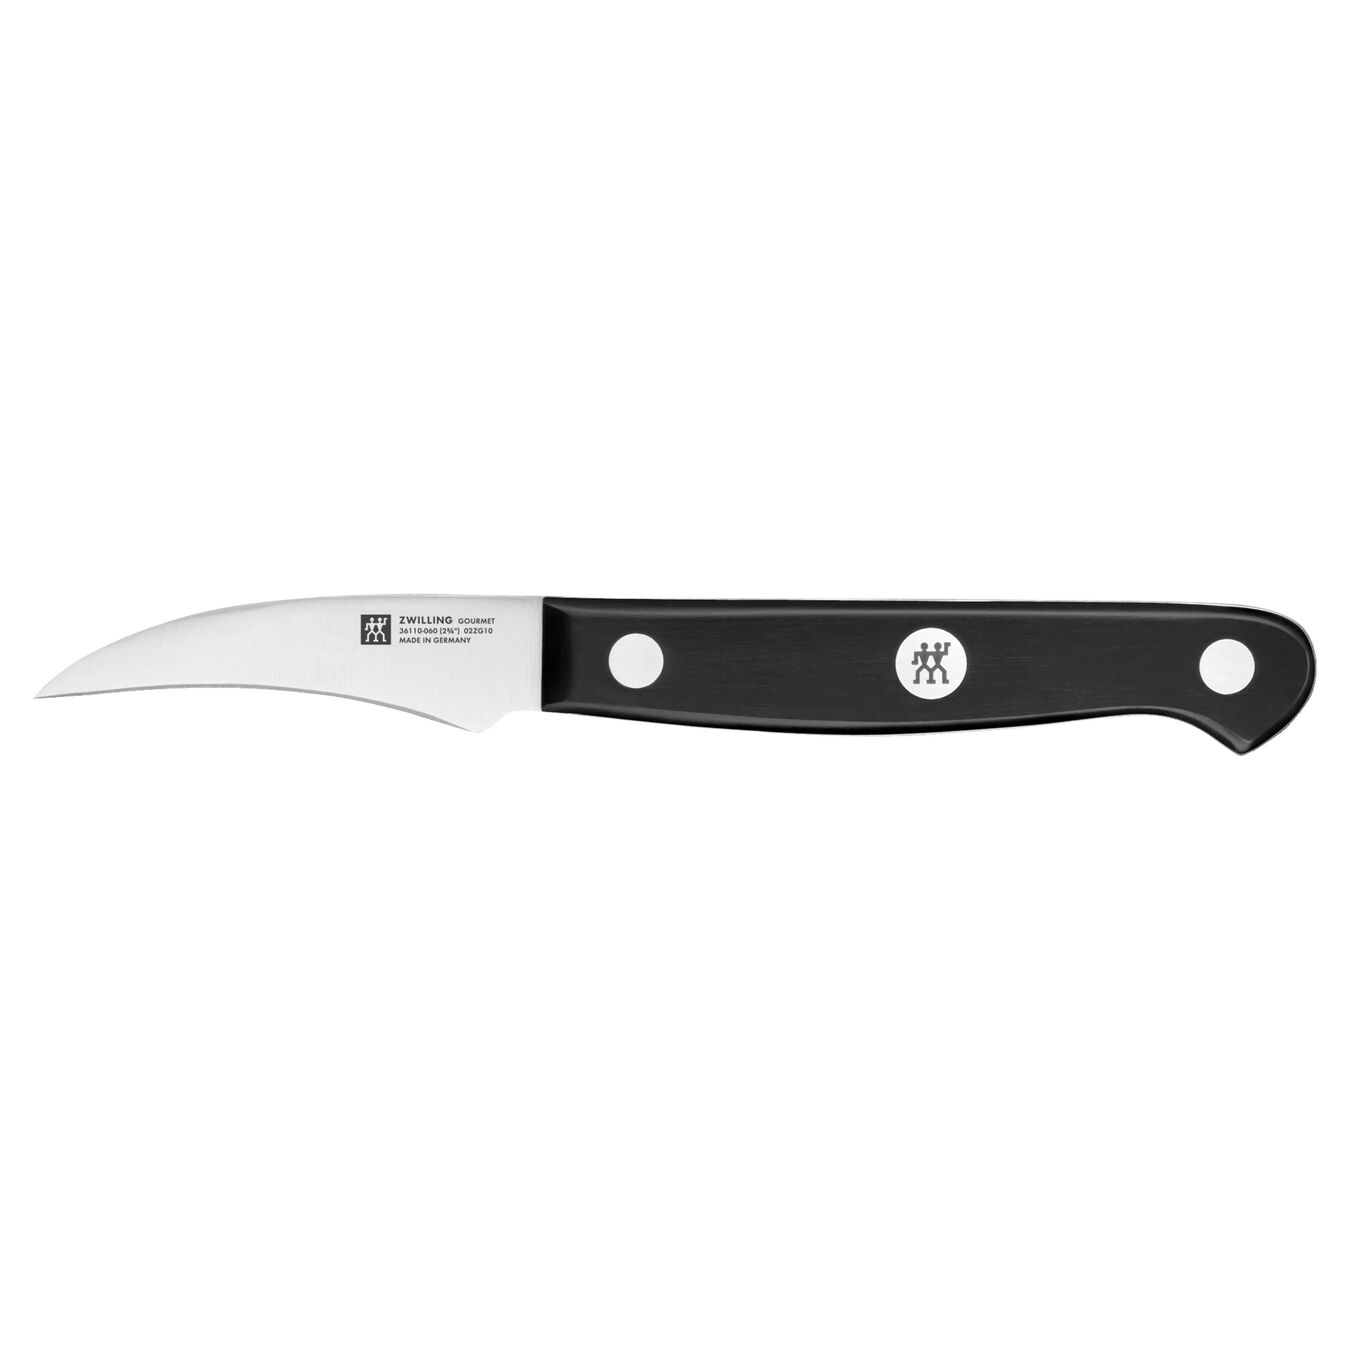 2.5-inch, Peeling knife - Visual Imperfections,,large 1